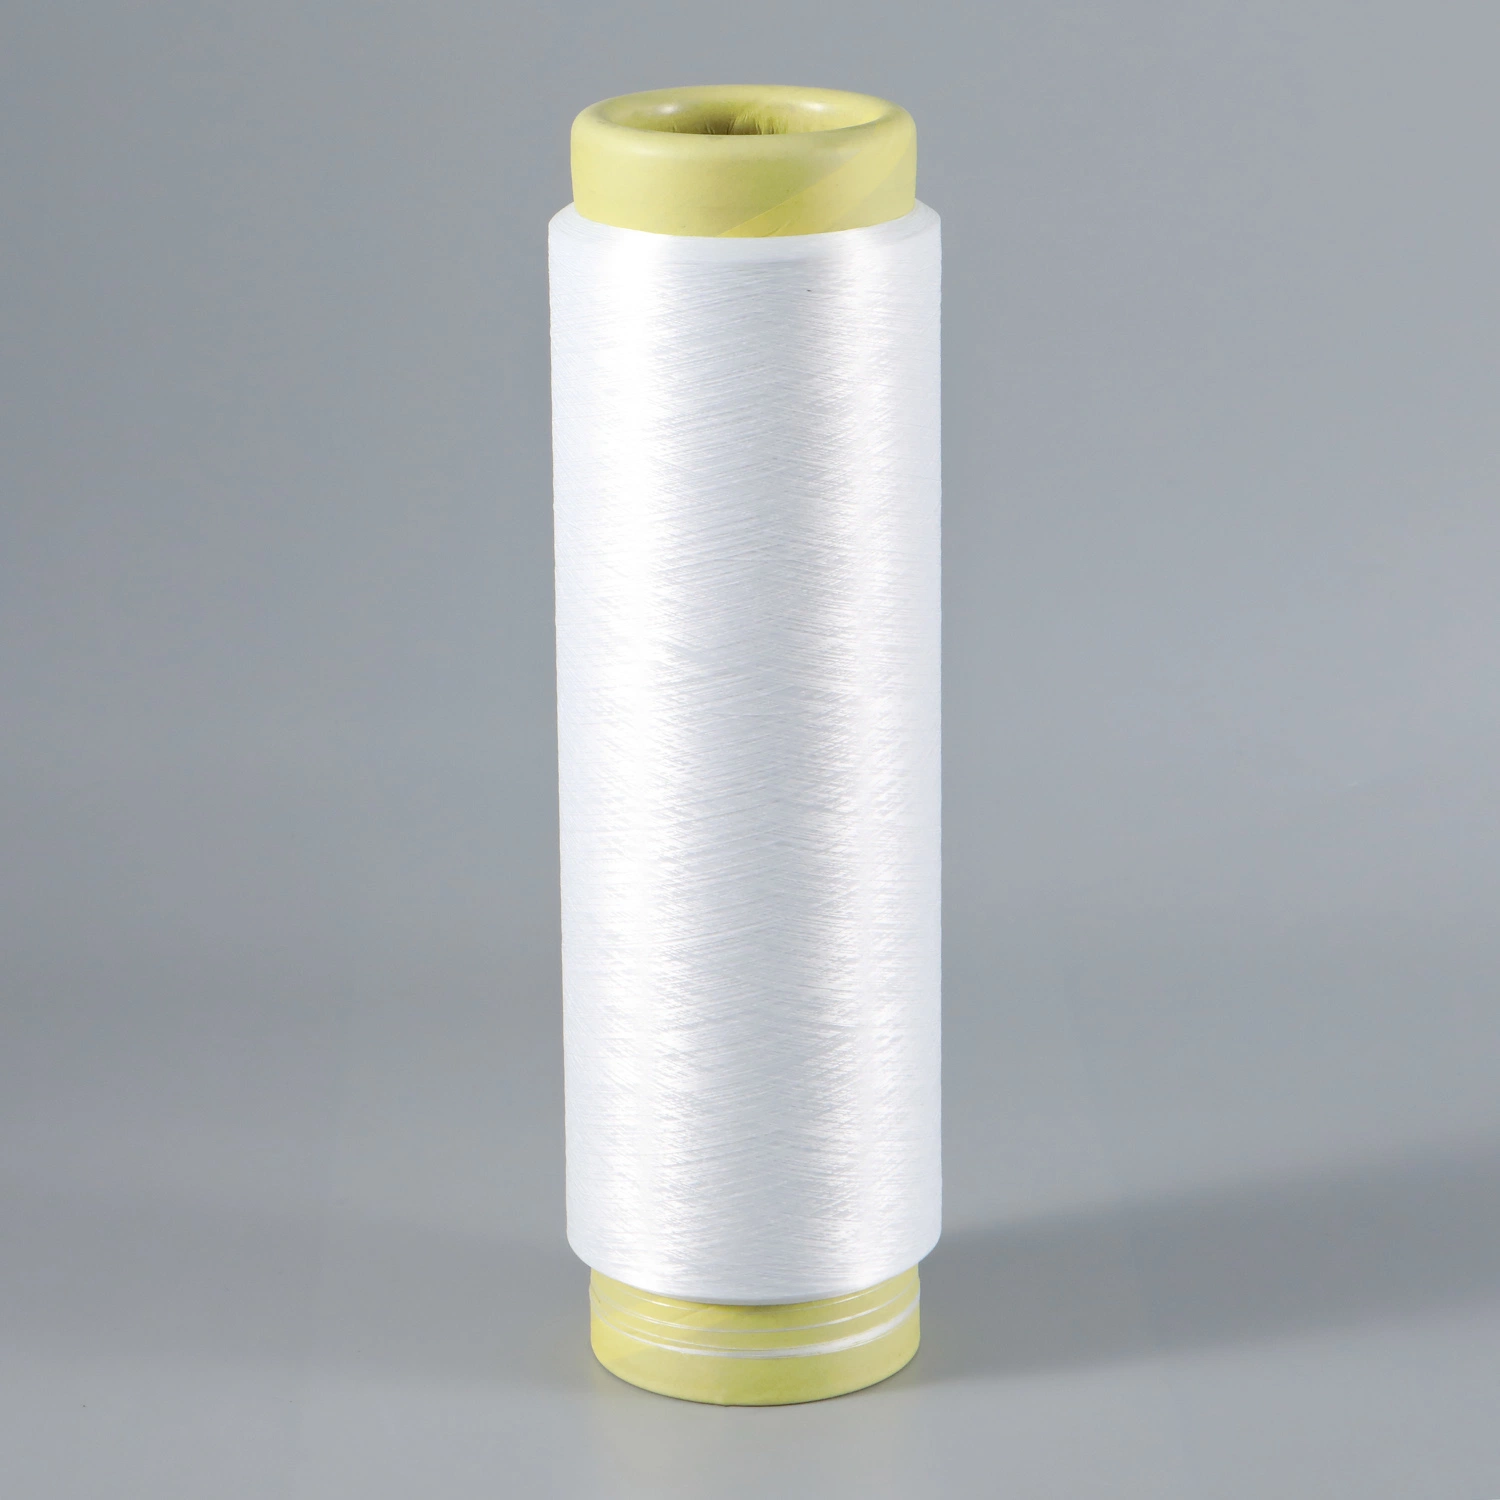 Semi-Dull 100d/144f DTY Recycled Polyester Yarn 100% Recycled Filament Yarn